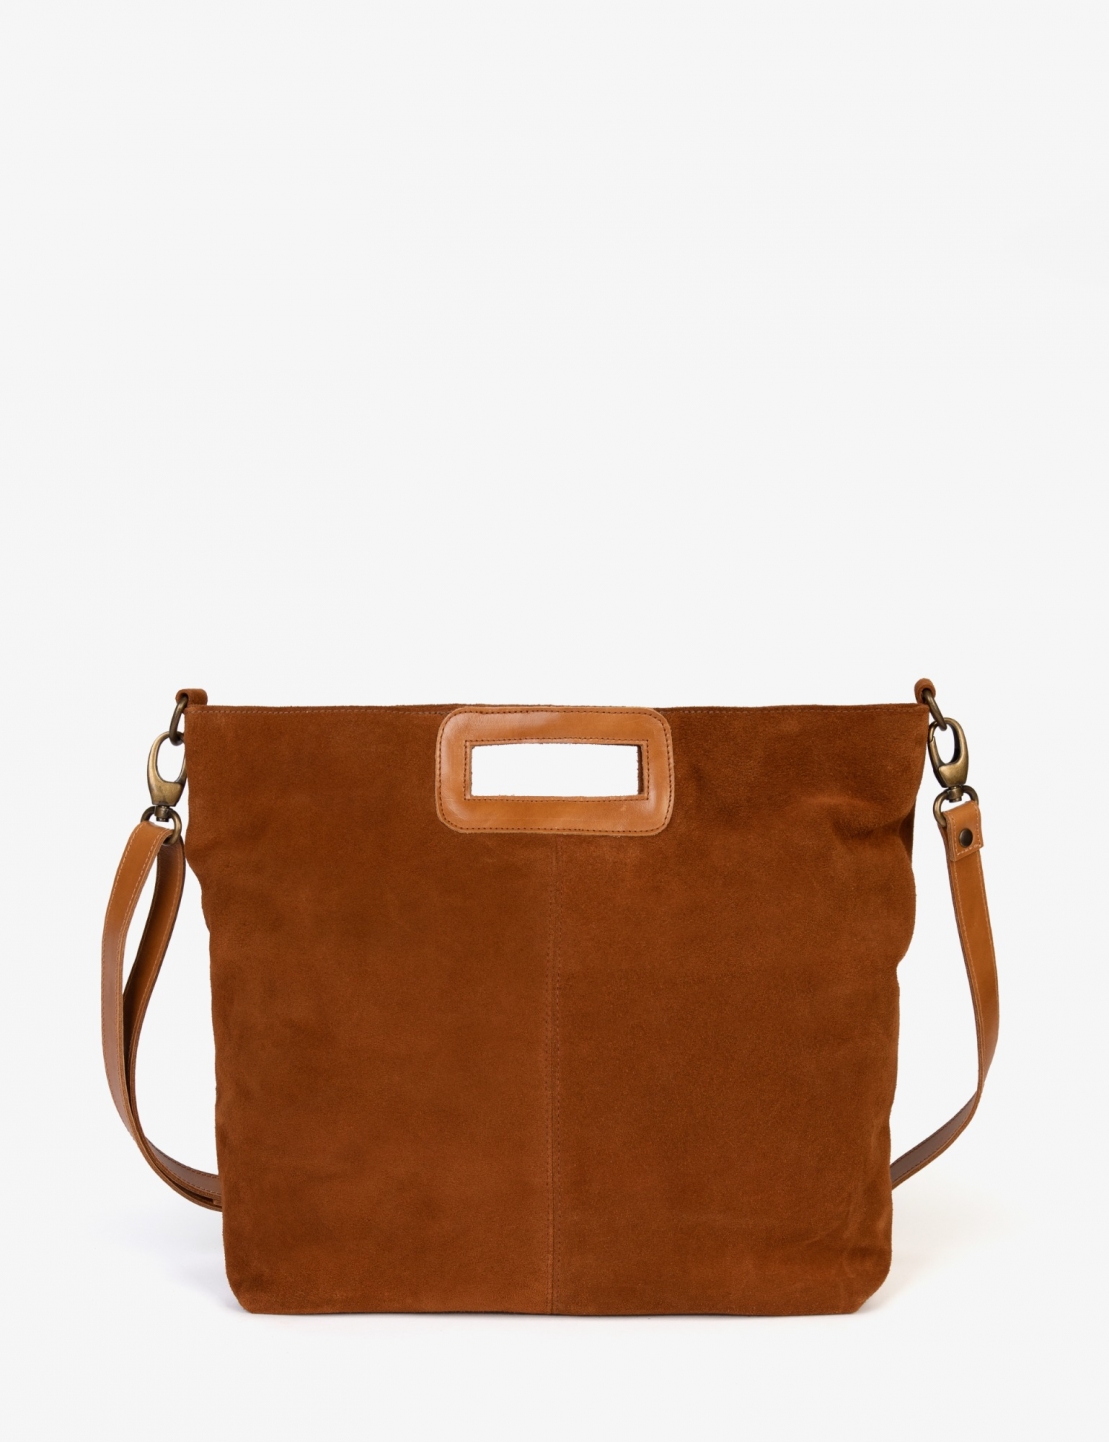 Postbox Suede Tote - Chestnut | Women's Bags | Penelope Chilvers